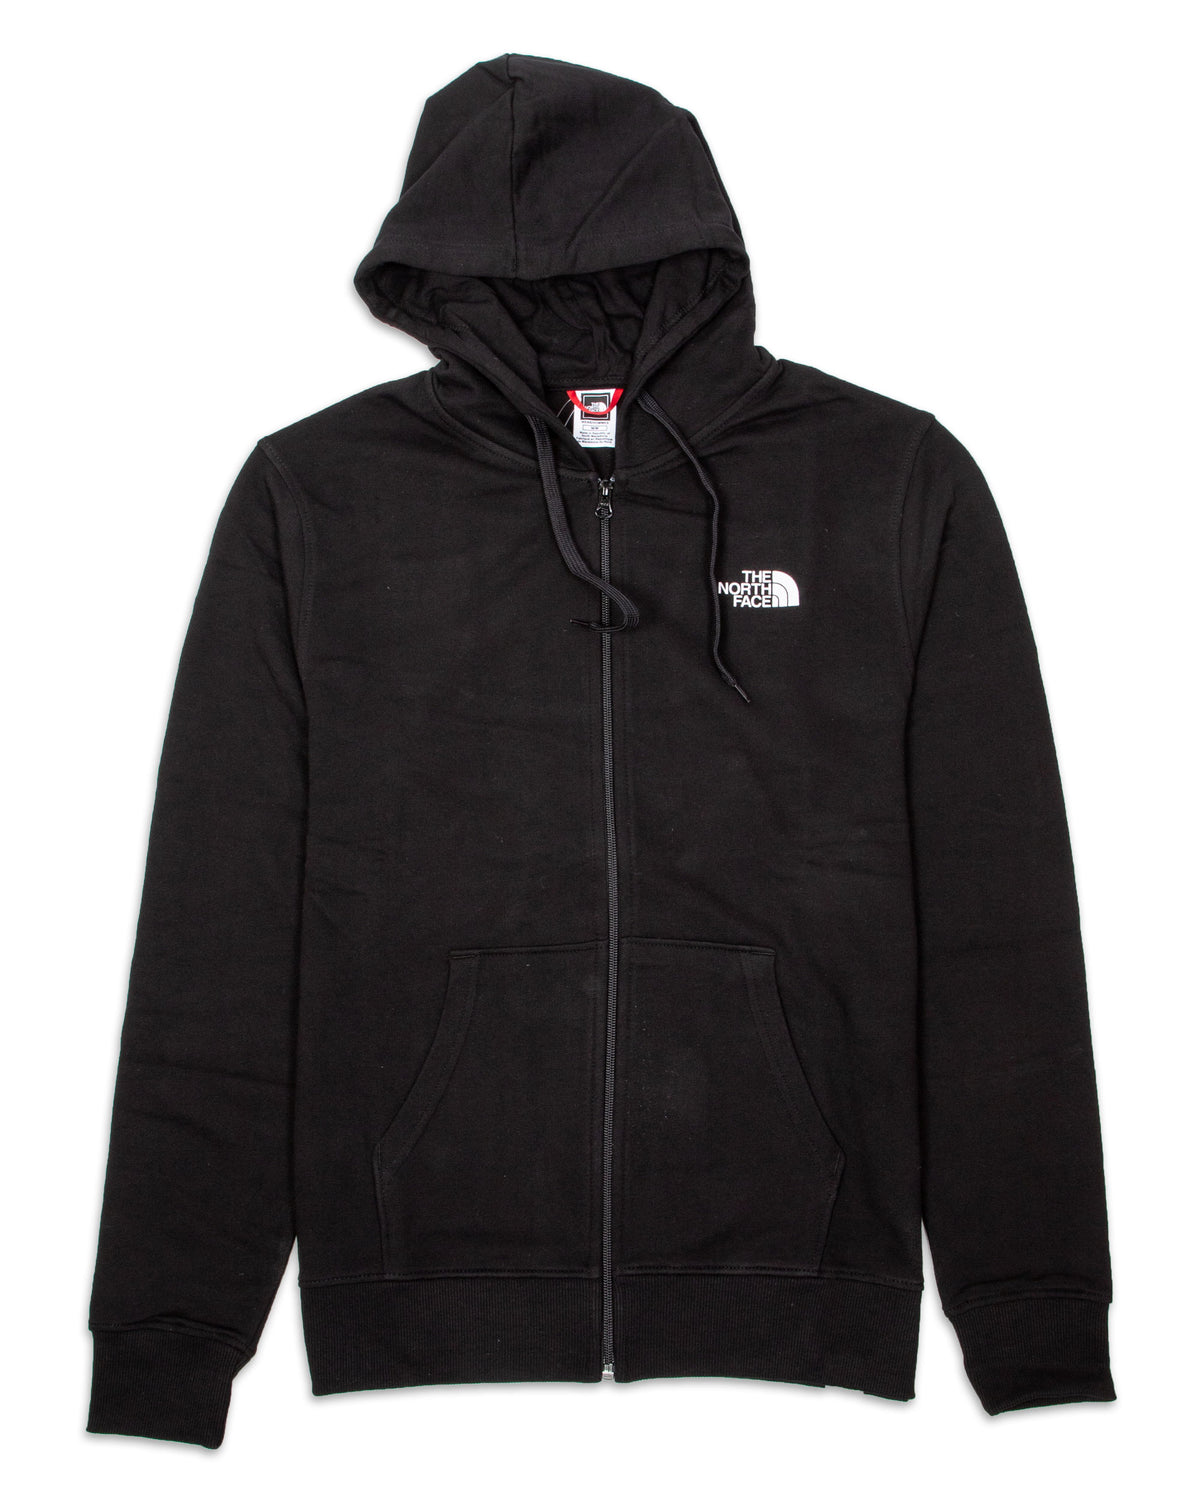 Man Hoodie The North face Open Gate Black